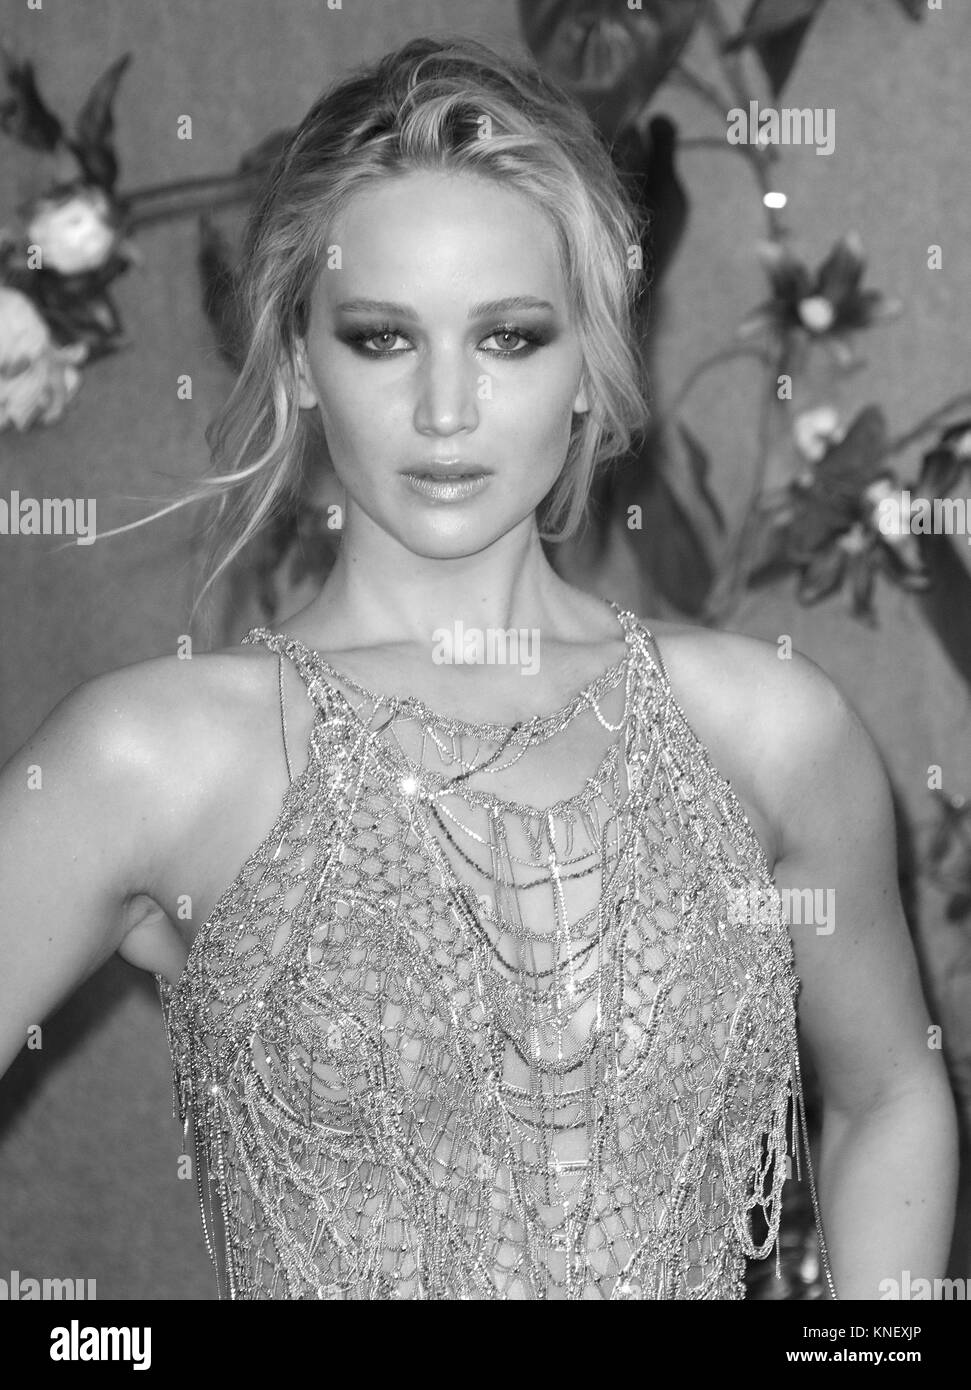 LONDON - SEP 06, 2017: Image digitally altered to monochrome Jennifer Lawrence attends the Mother UK film premiere at Odeon Leicester Square in London Stock Photo